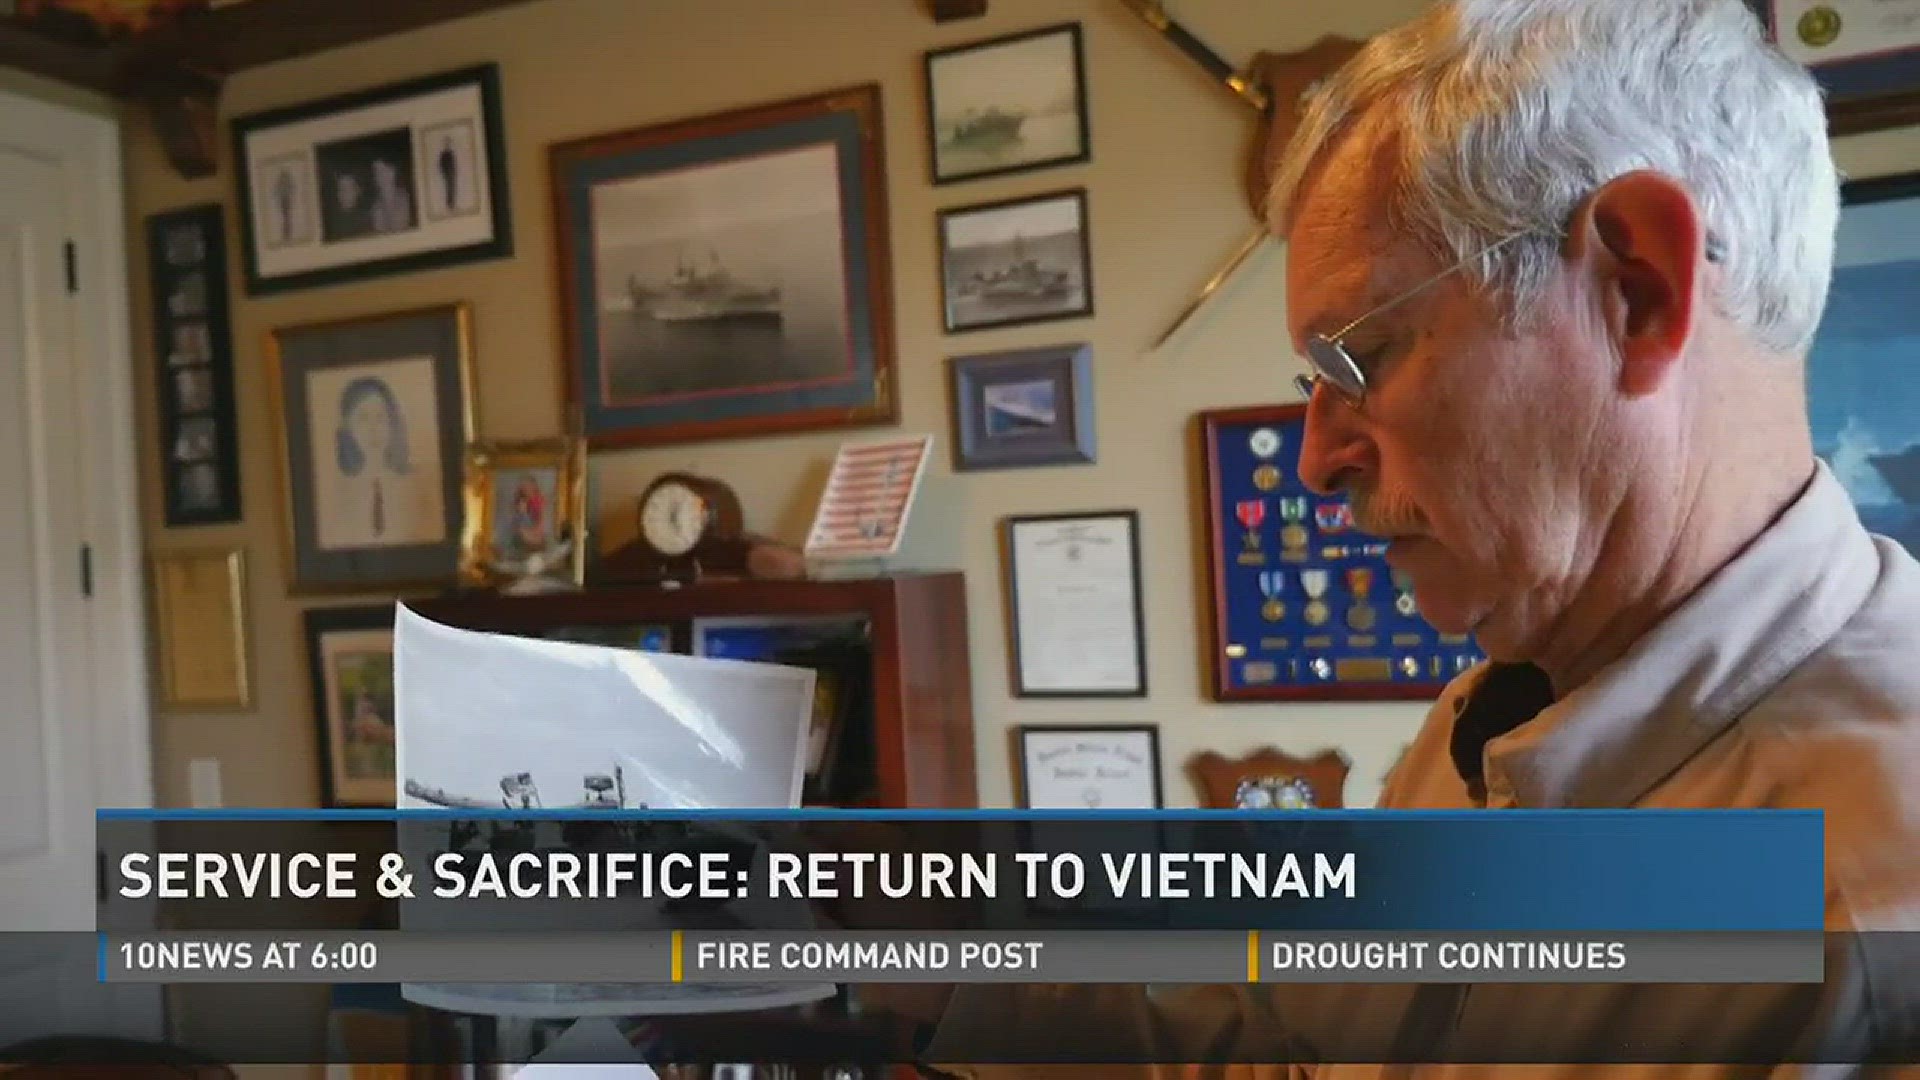 Nov. 10, 2016: In January, close to two dozen veterans of Vietnam plan to return to battlefields they last saw 50 years ago.